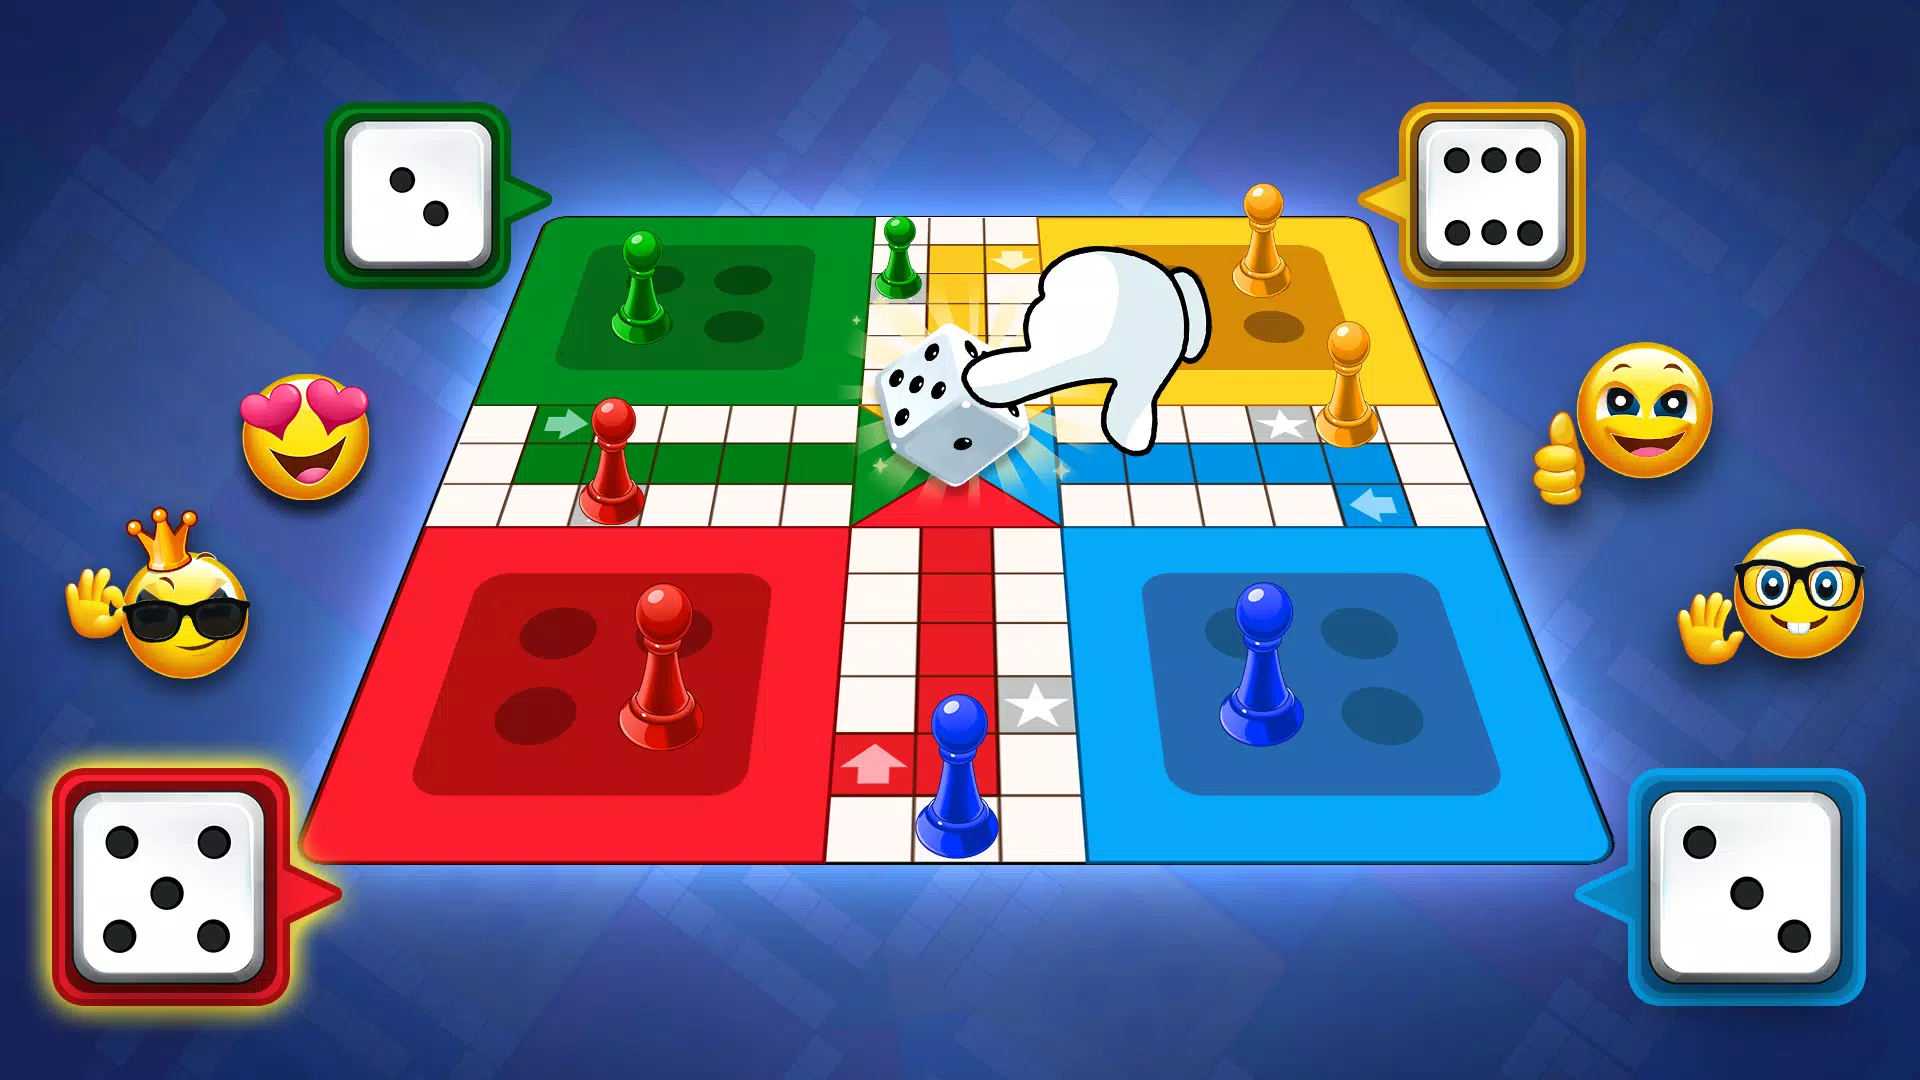 Ludo 2.0 The Game of Life 2008 by Hasbro PC Version Download